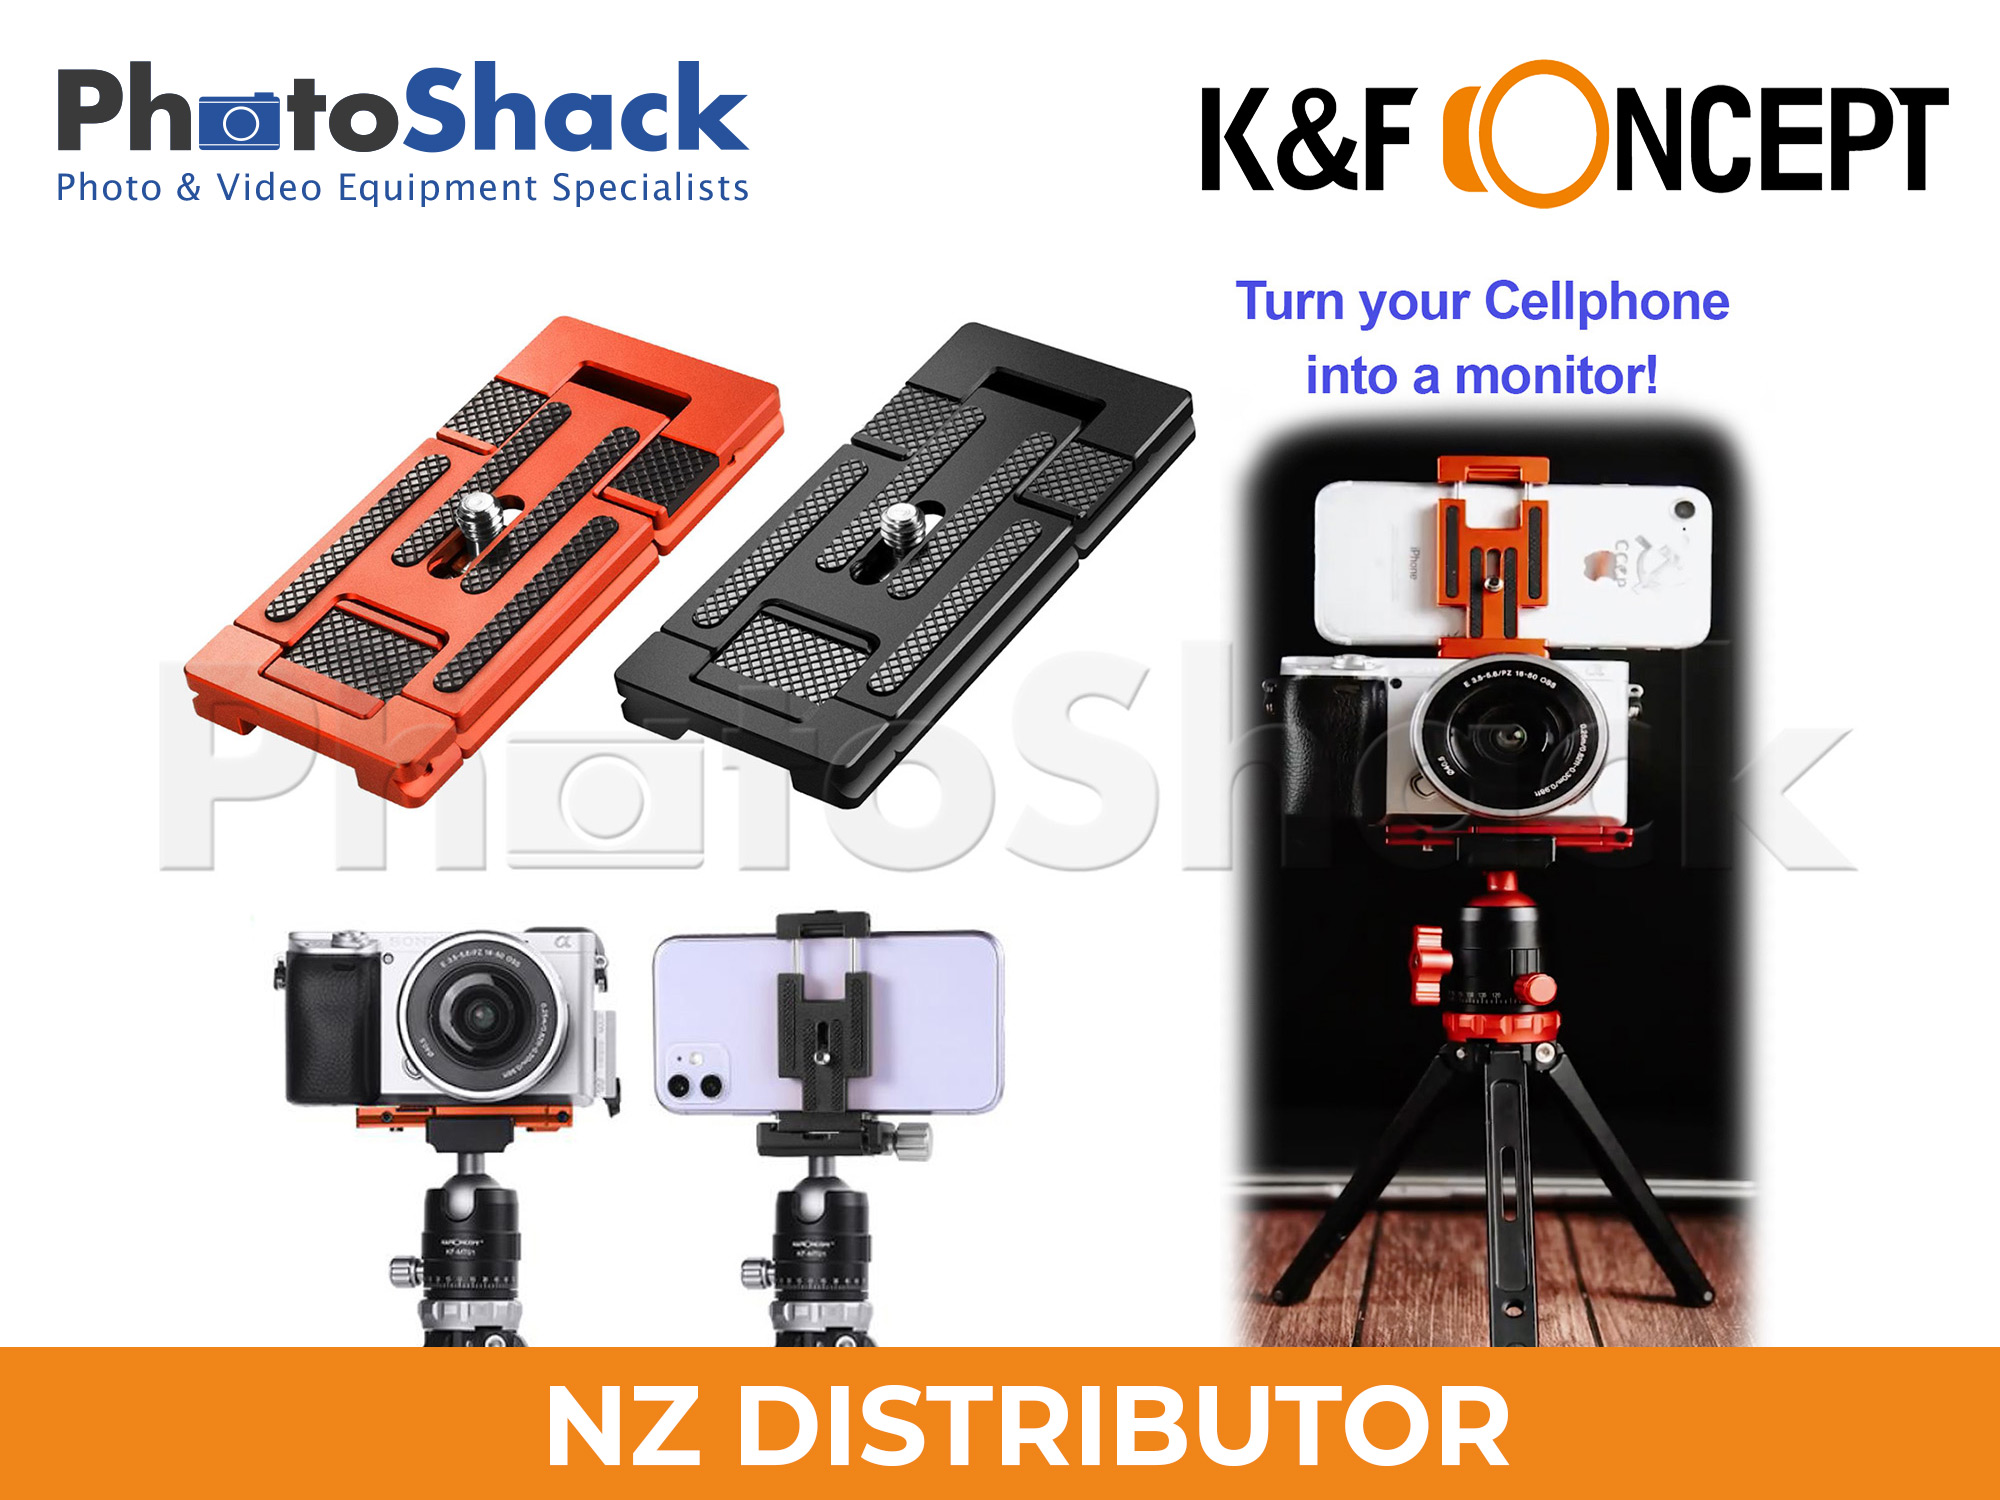 K&F All-in-one Quick Release Plate for Cameras and Smartphones